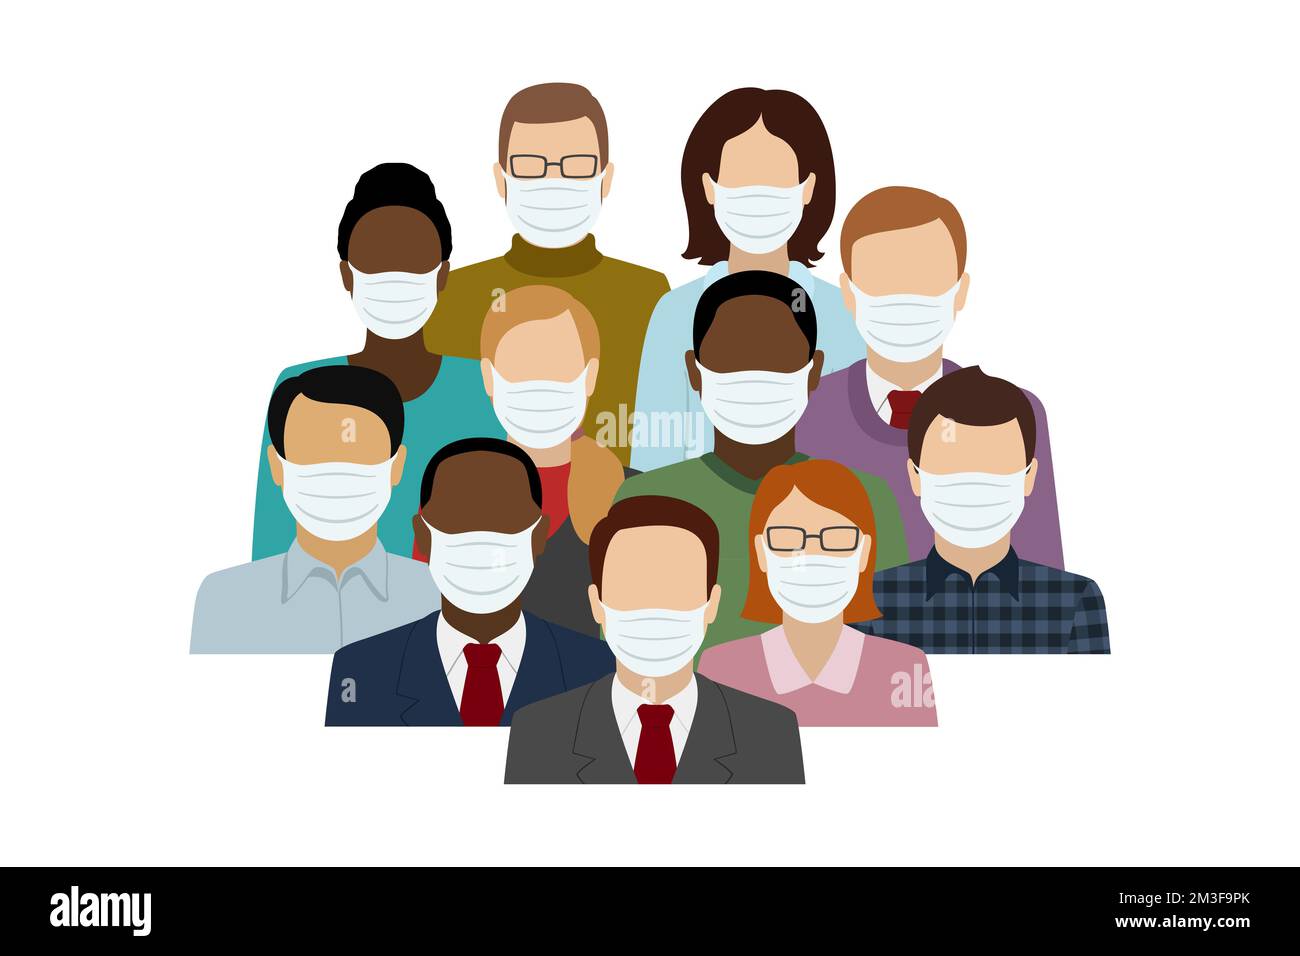 Faceless mask Stock Vector Images - Alamy